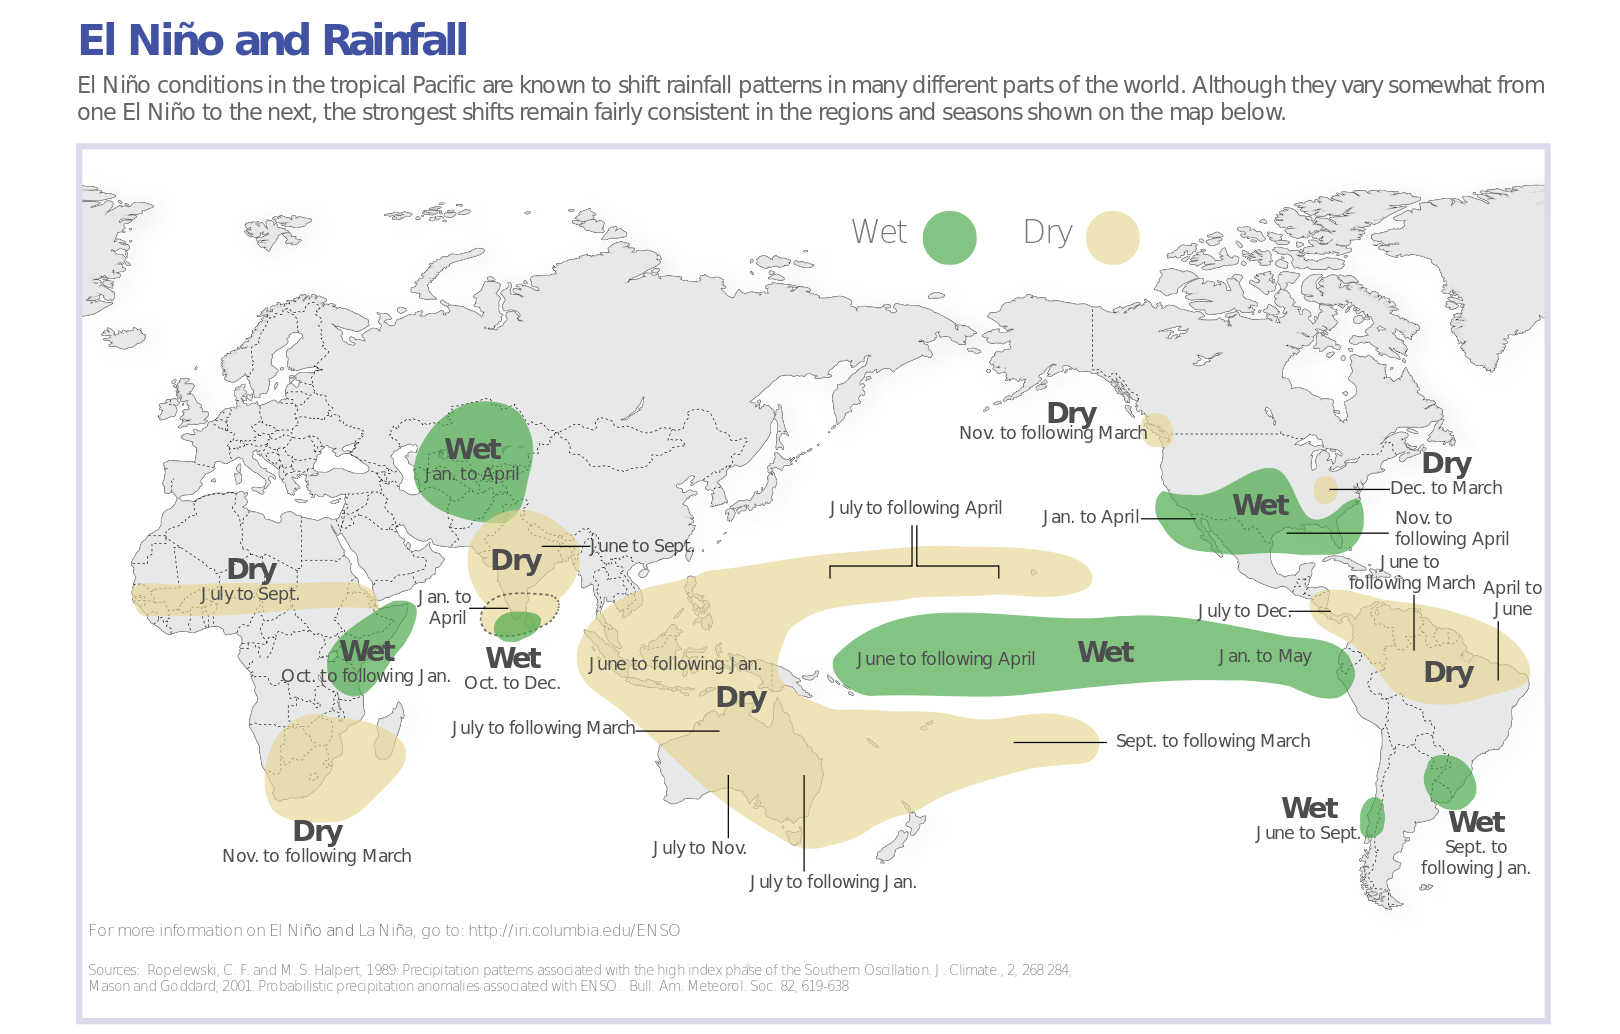 Global map showing locations effected by El Nino and extreme weather patterns